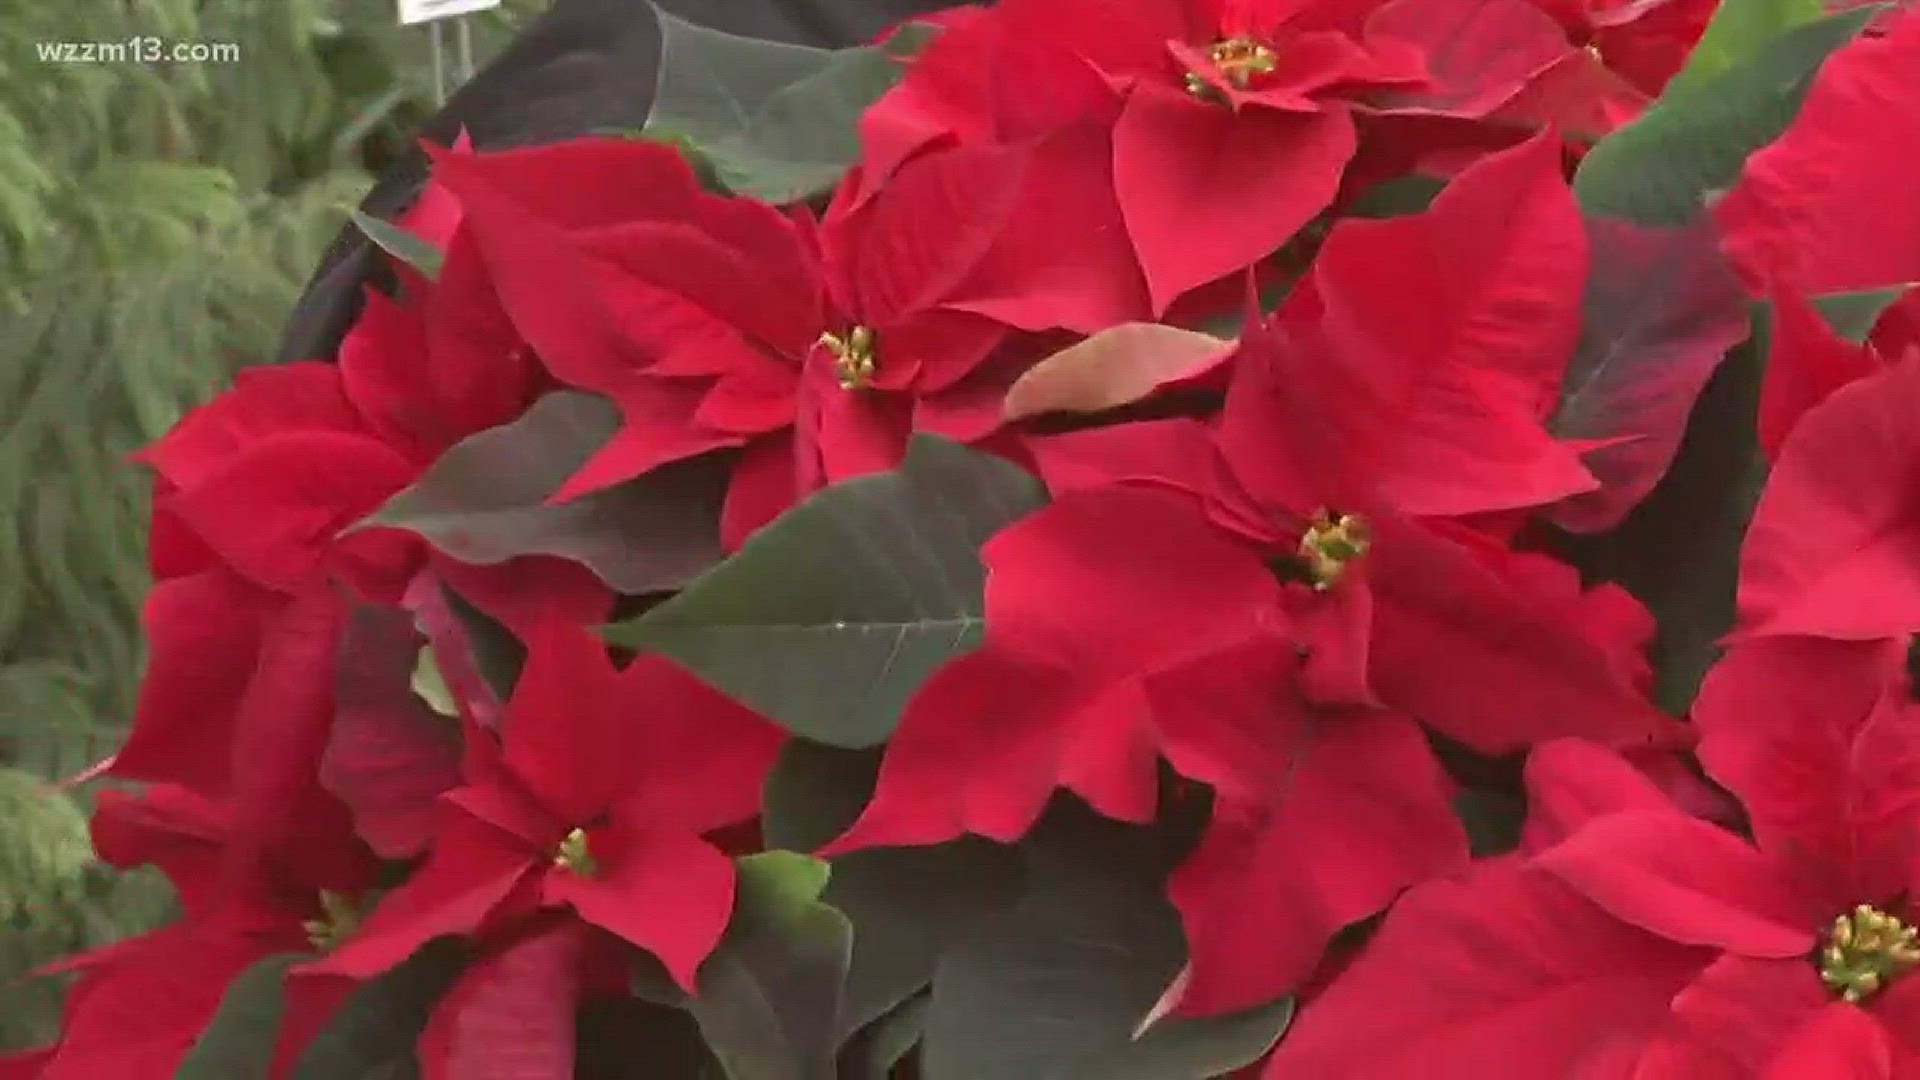 Greenthumb: The history of poinsettias